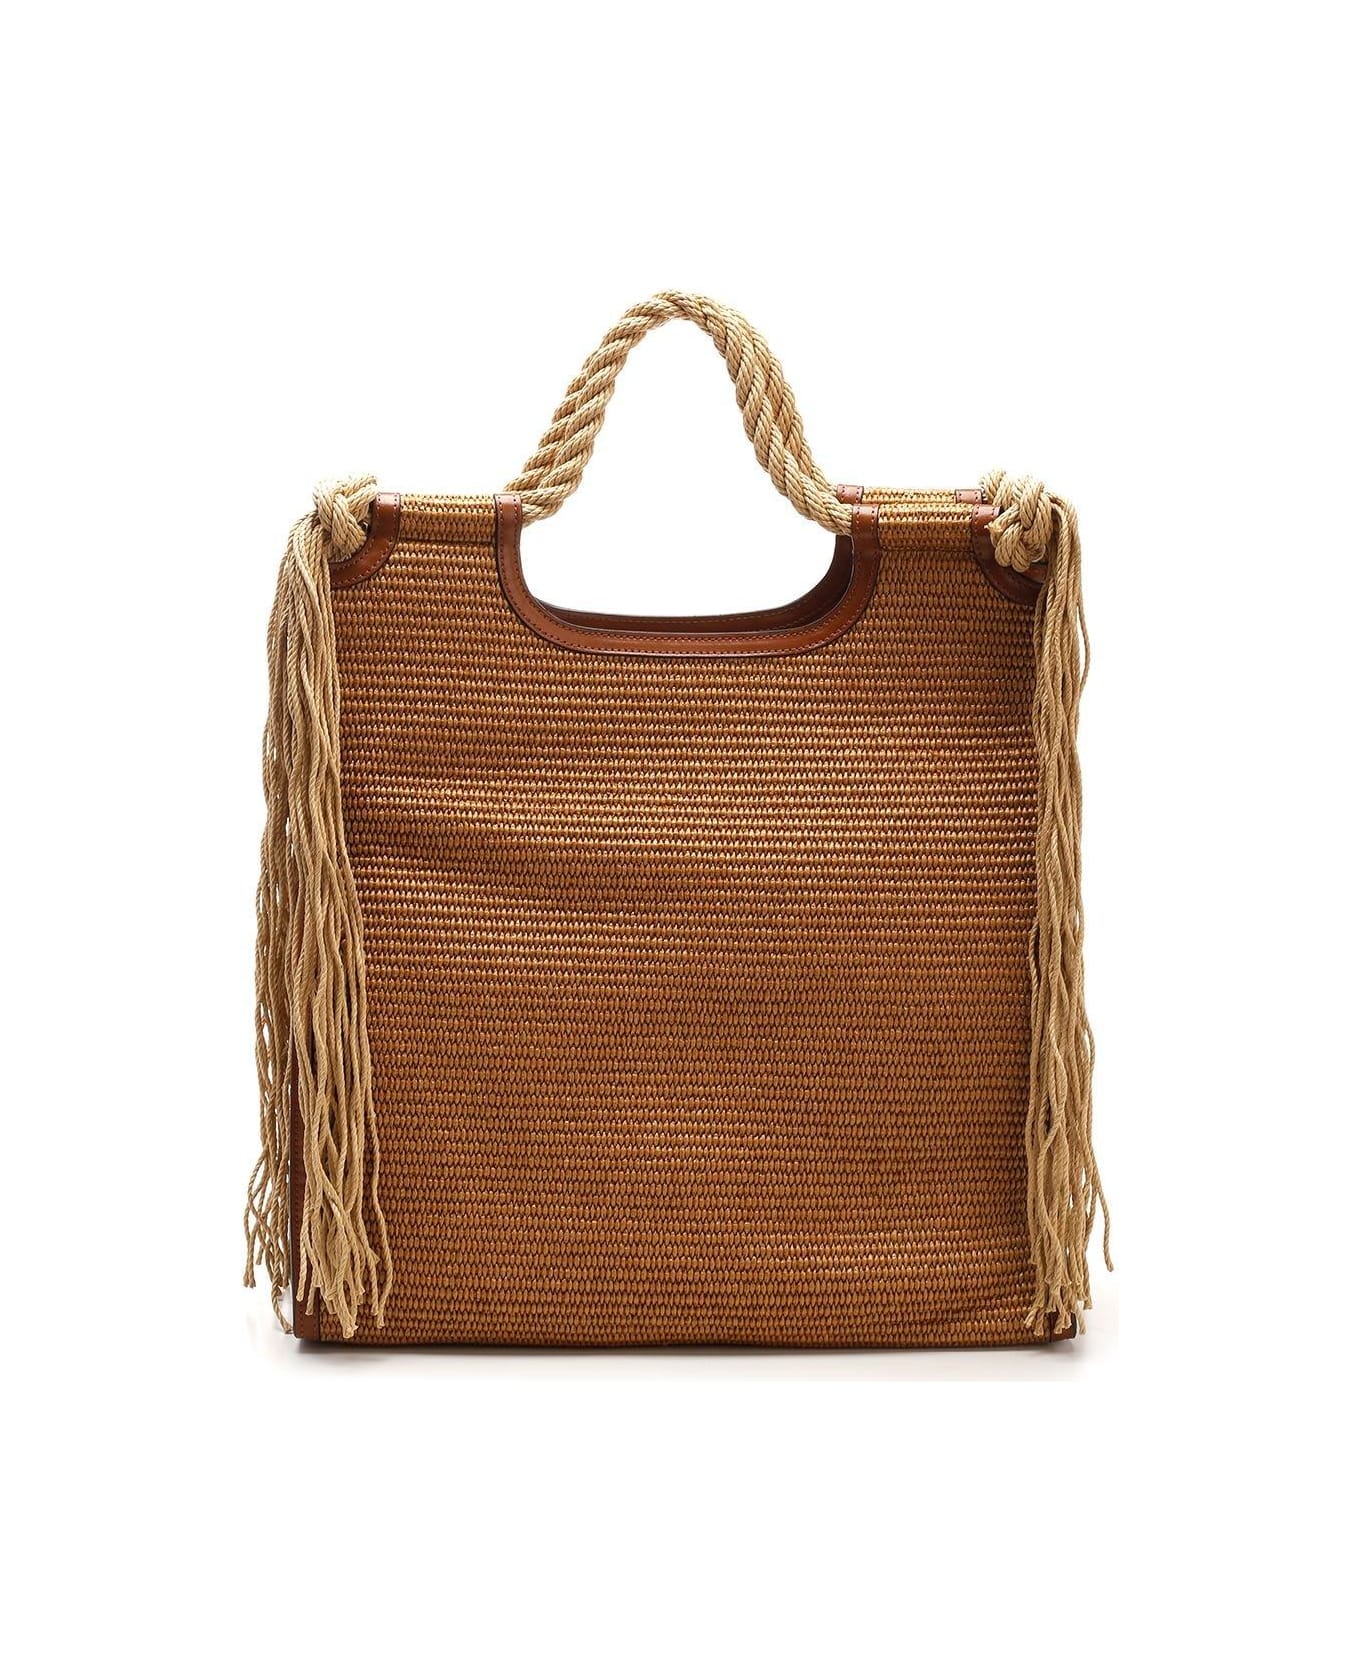 Marni Marcel North-south Fringed Tote Bag - Marrone トートバッグ